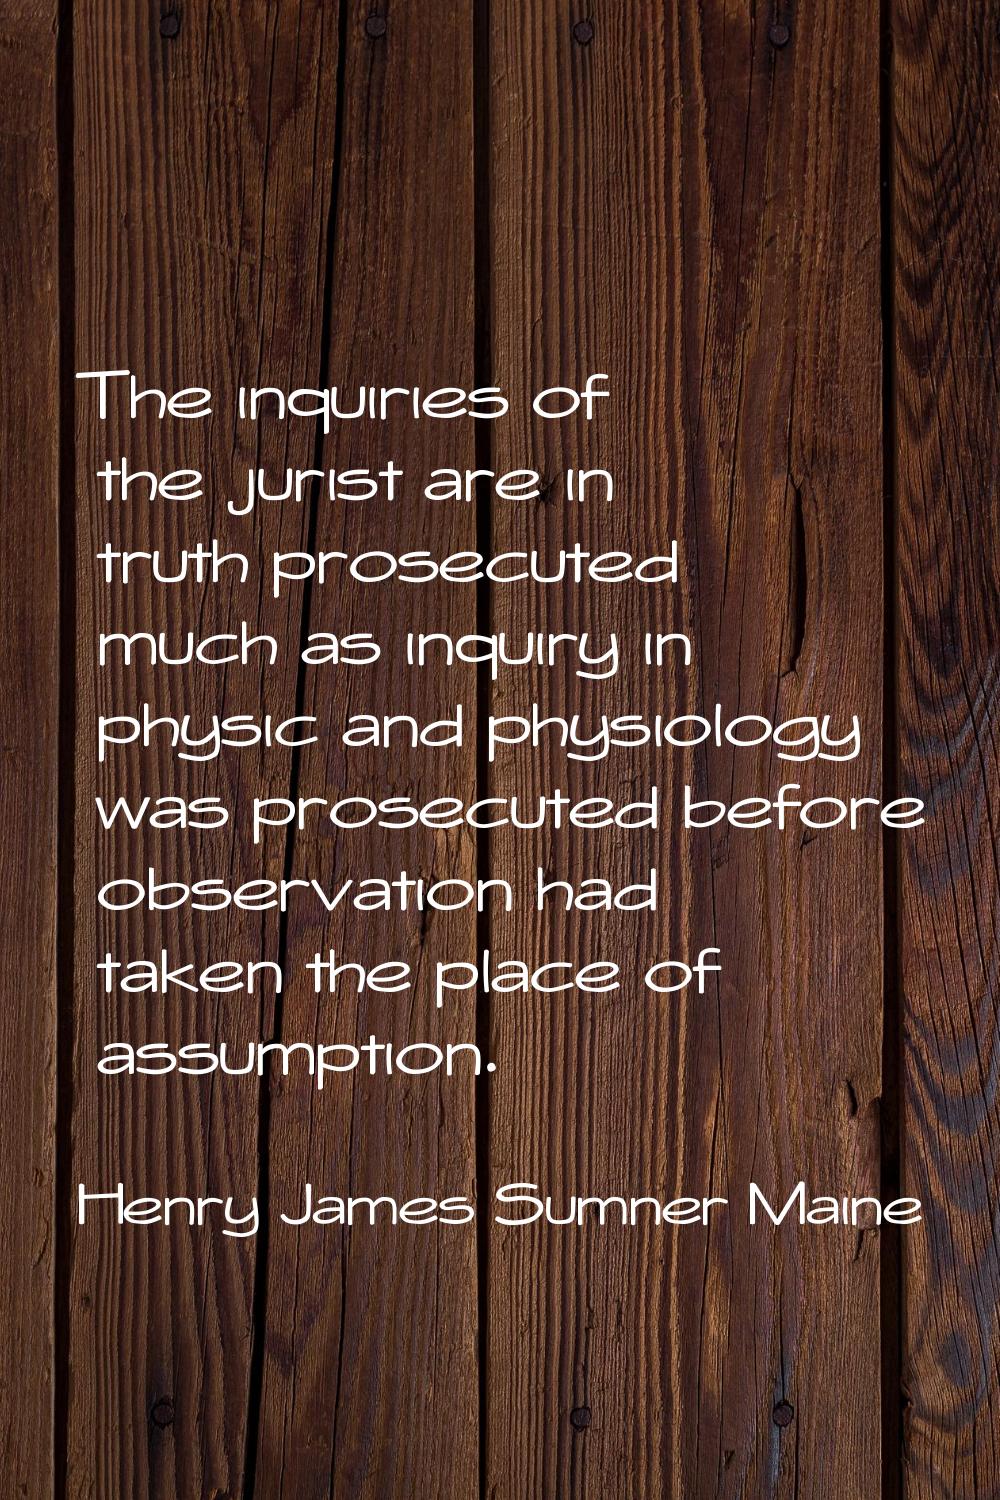 The inquiries of the jurist are in truth prosecuted much as inquiry in physic and physiology was pr